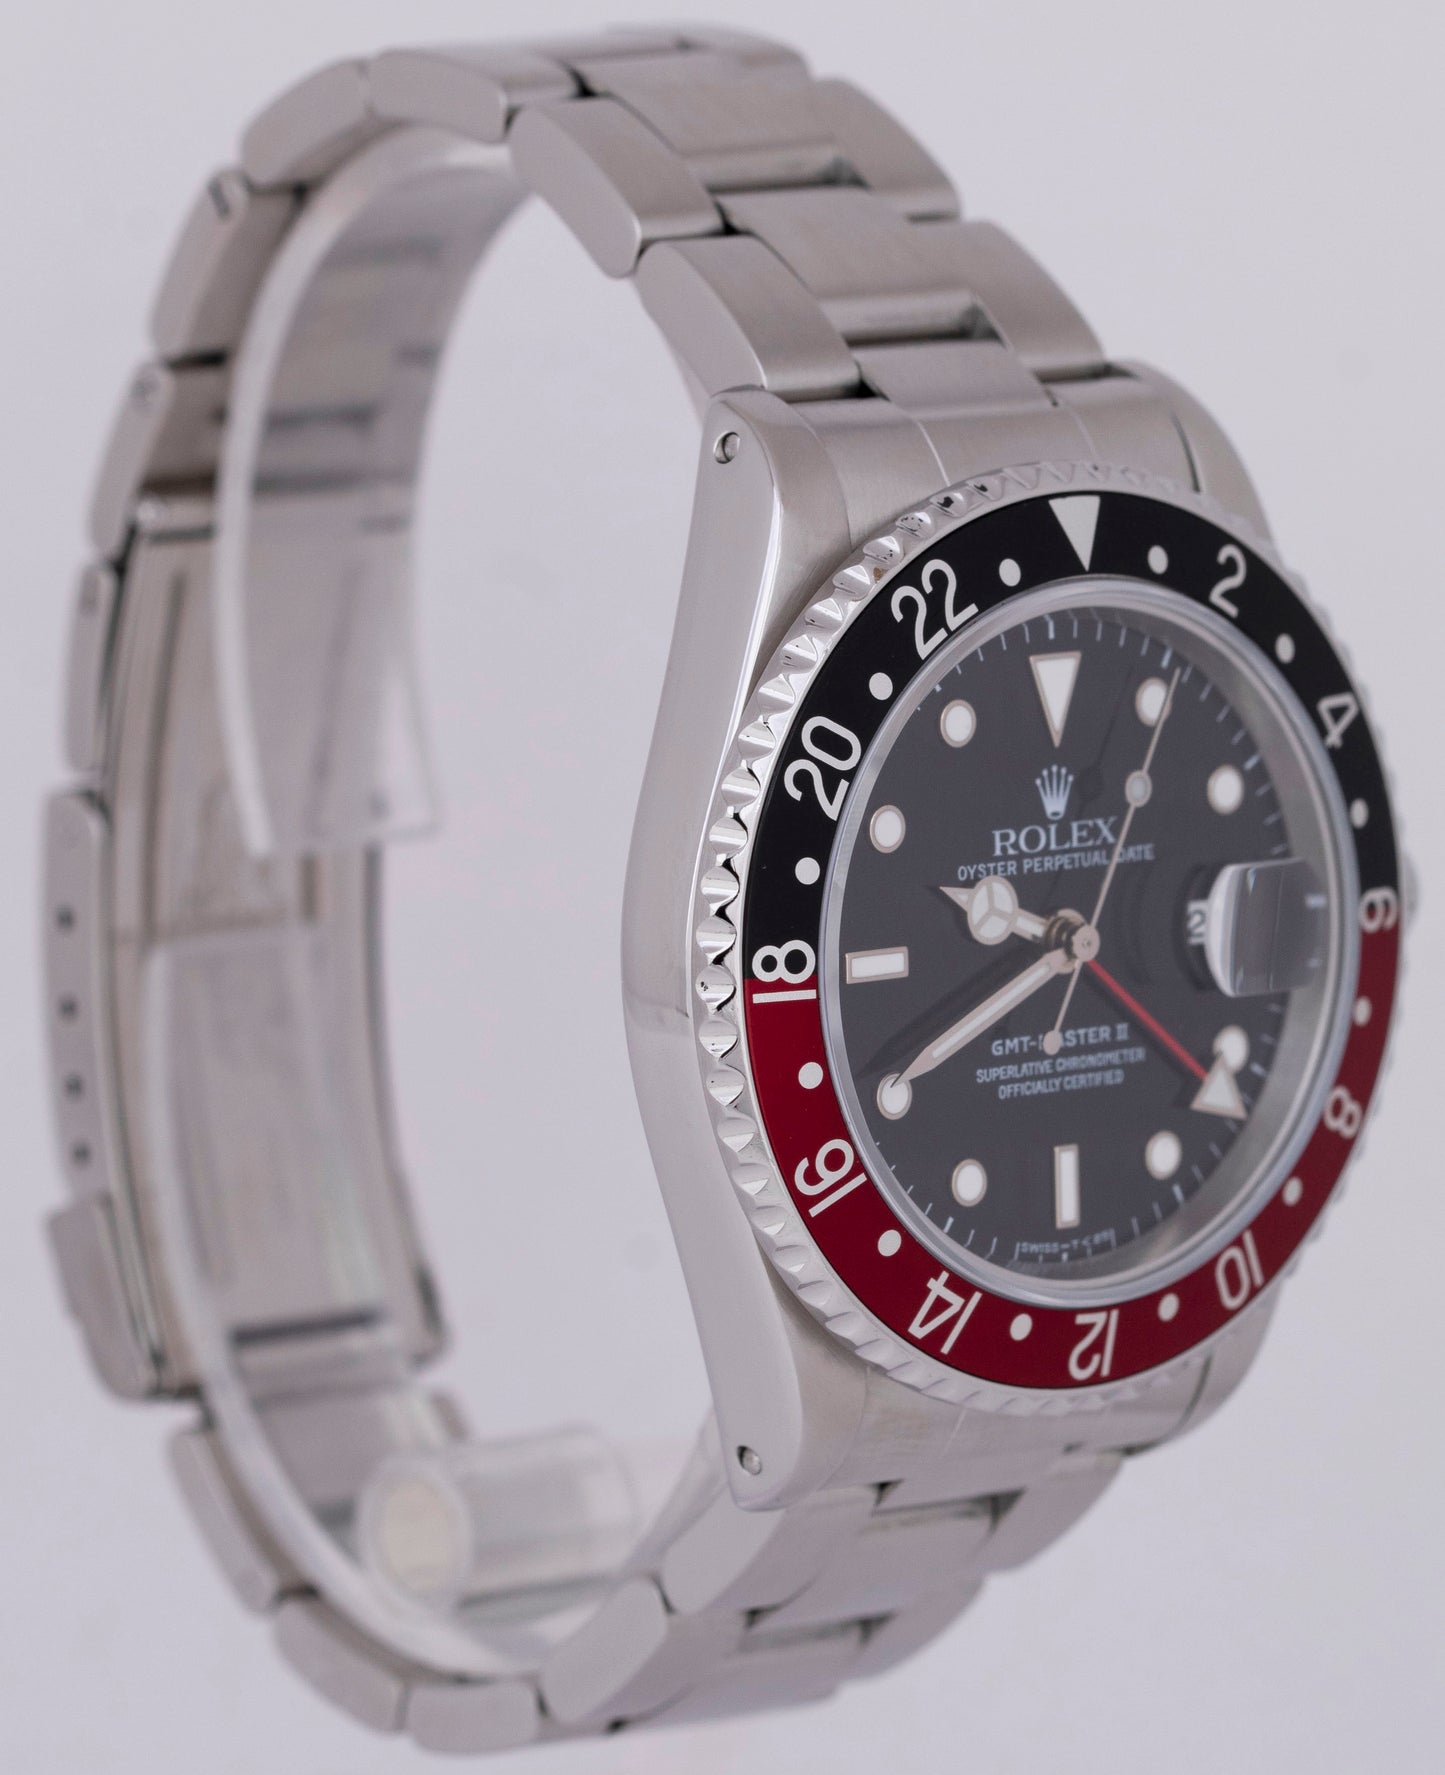 Rolex GMT-Master II COKE Stainless Steel Black Red Oyster Automatic Watch 16710